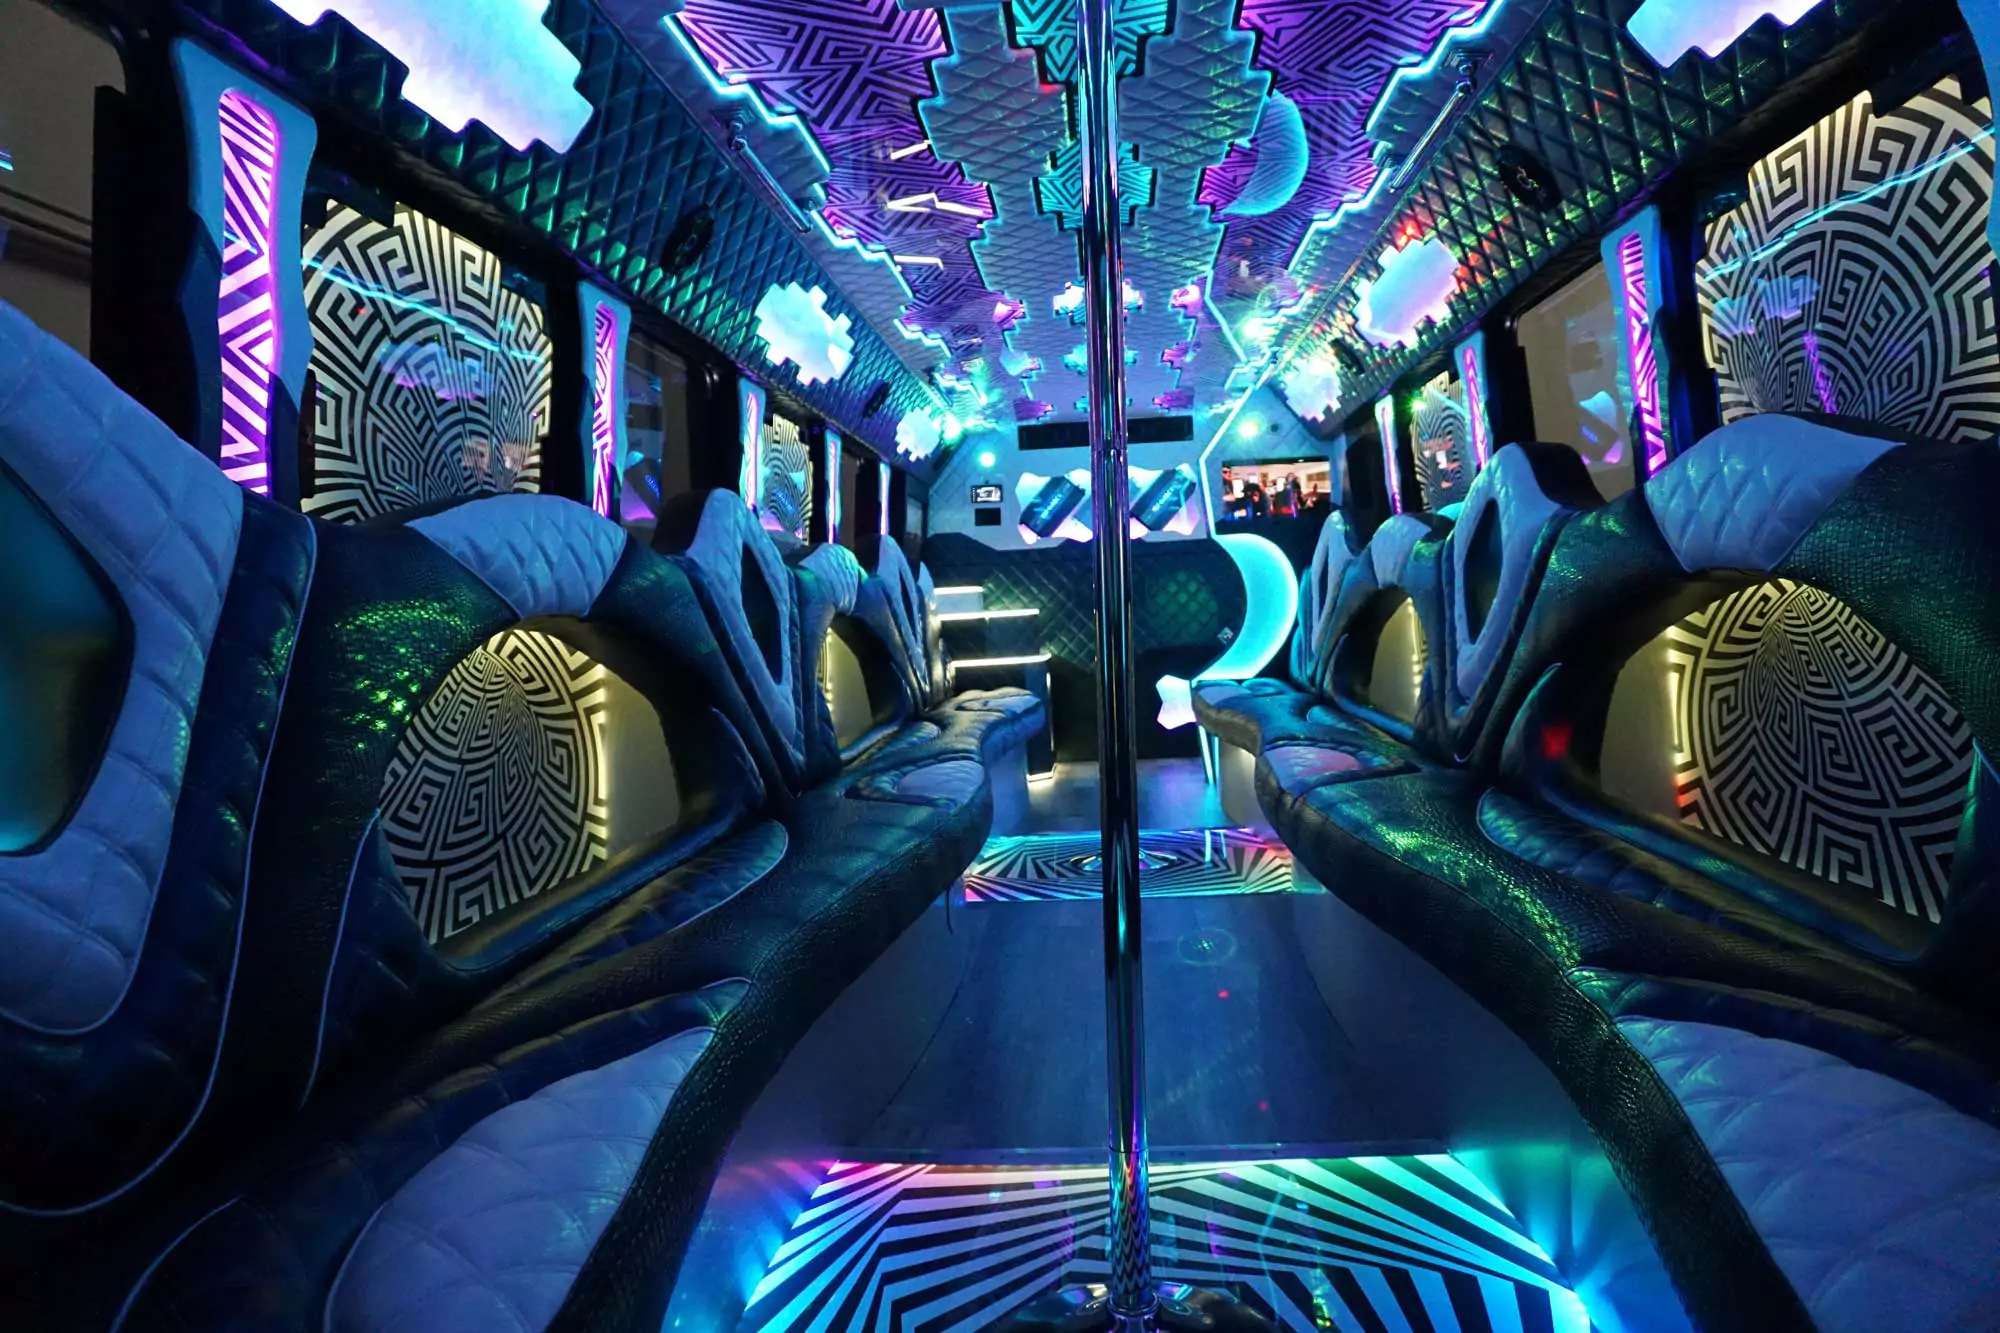 ᑕ❶ᑐ Chicago Party Bus (40 Passengers) - Epic Edition for Hire